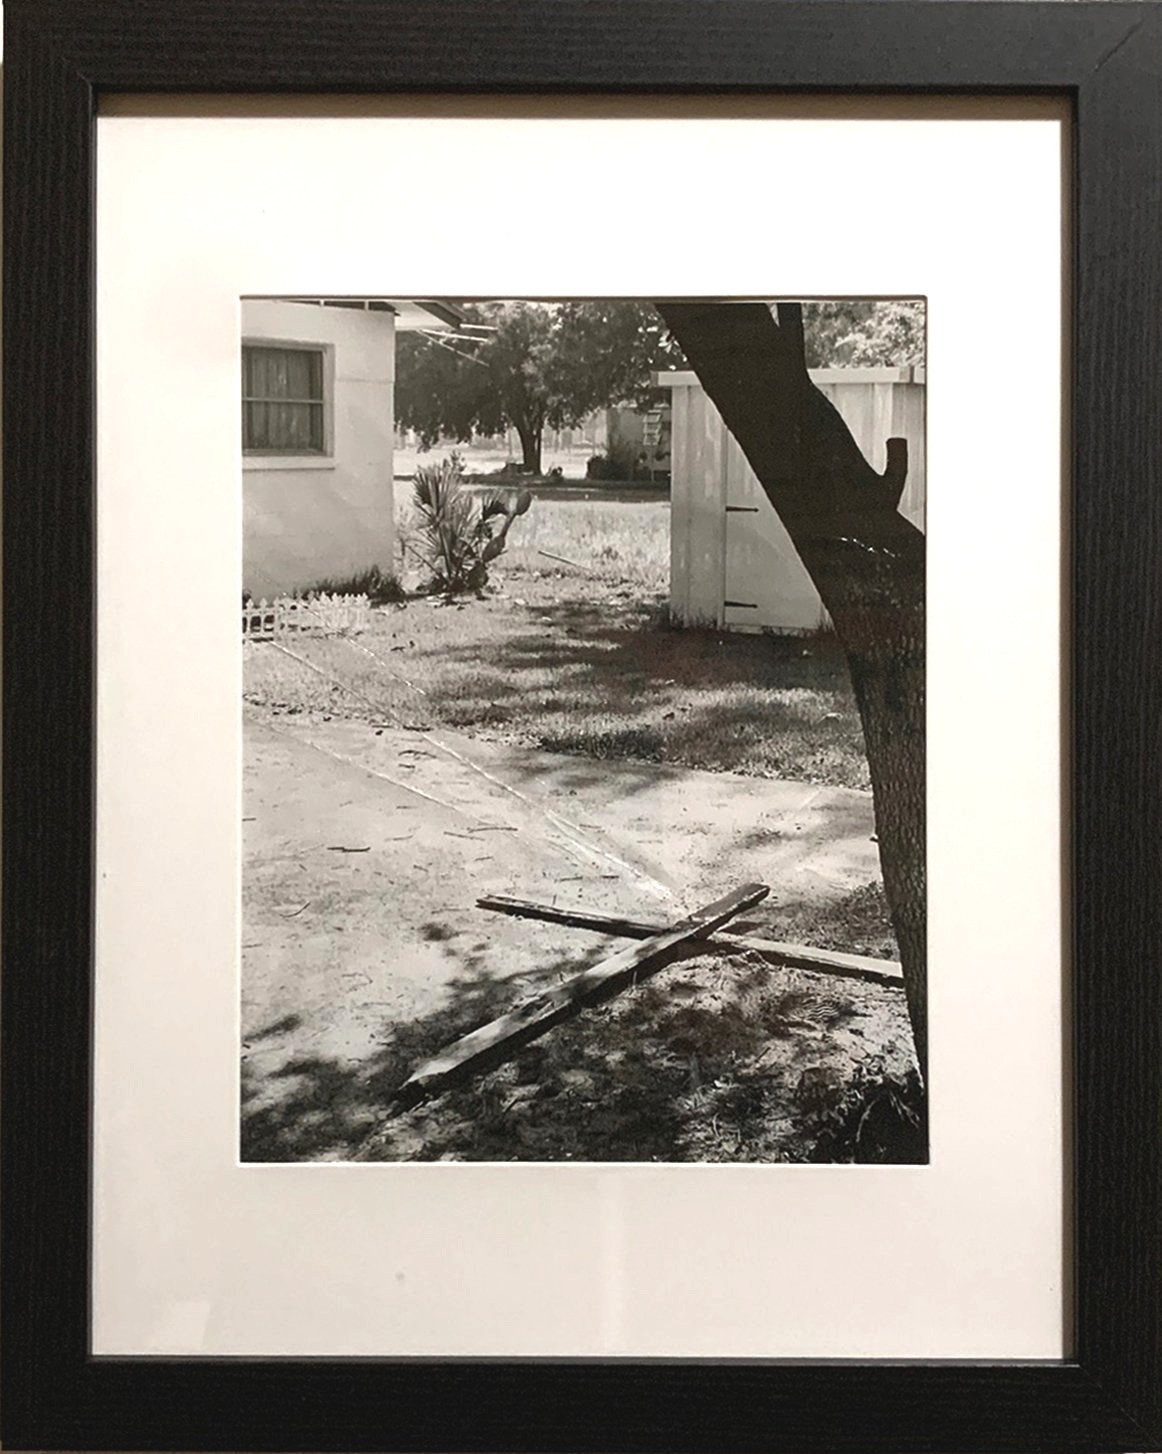 7. 6/8/76 – 1:30 am cross burning in the yard of a woman and her 16-year-old son, who are the only black residents in the immediate neighborhood. St. Petersburgh, Florida